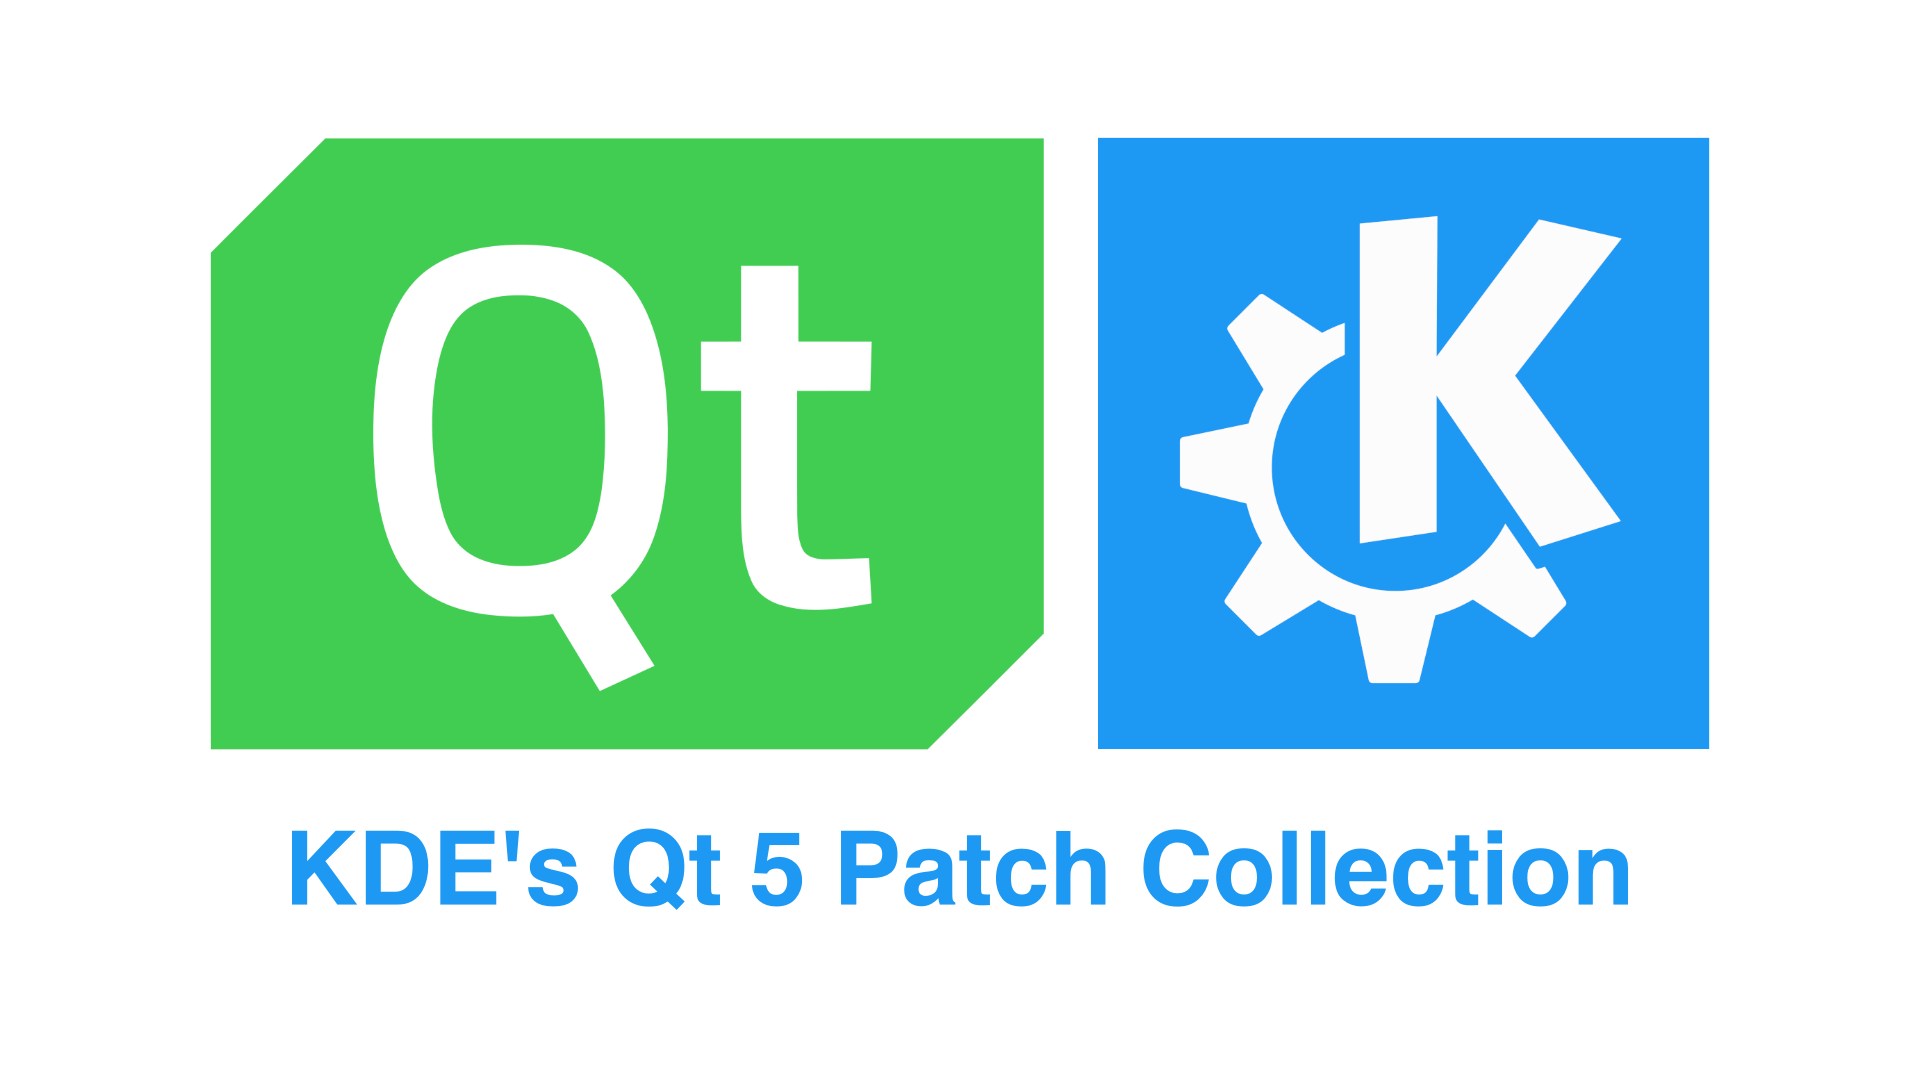 KDE Will Support Qt 5 to Offer Reliable and Stable KDE Apps Until Qt 6 Is Fully Adopted